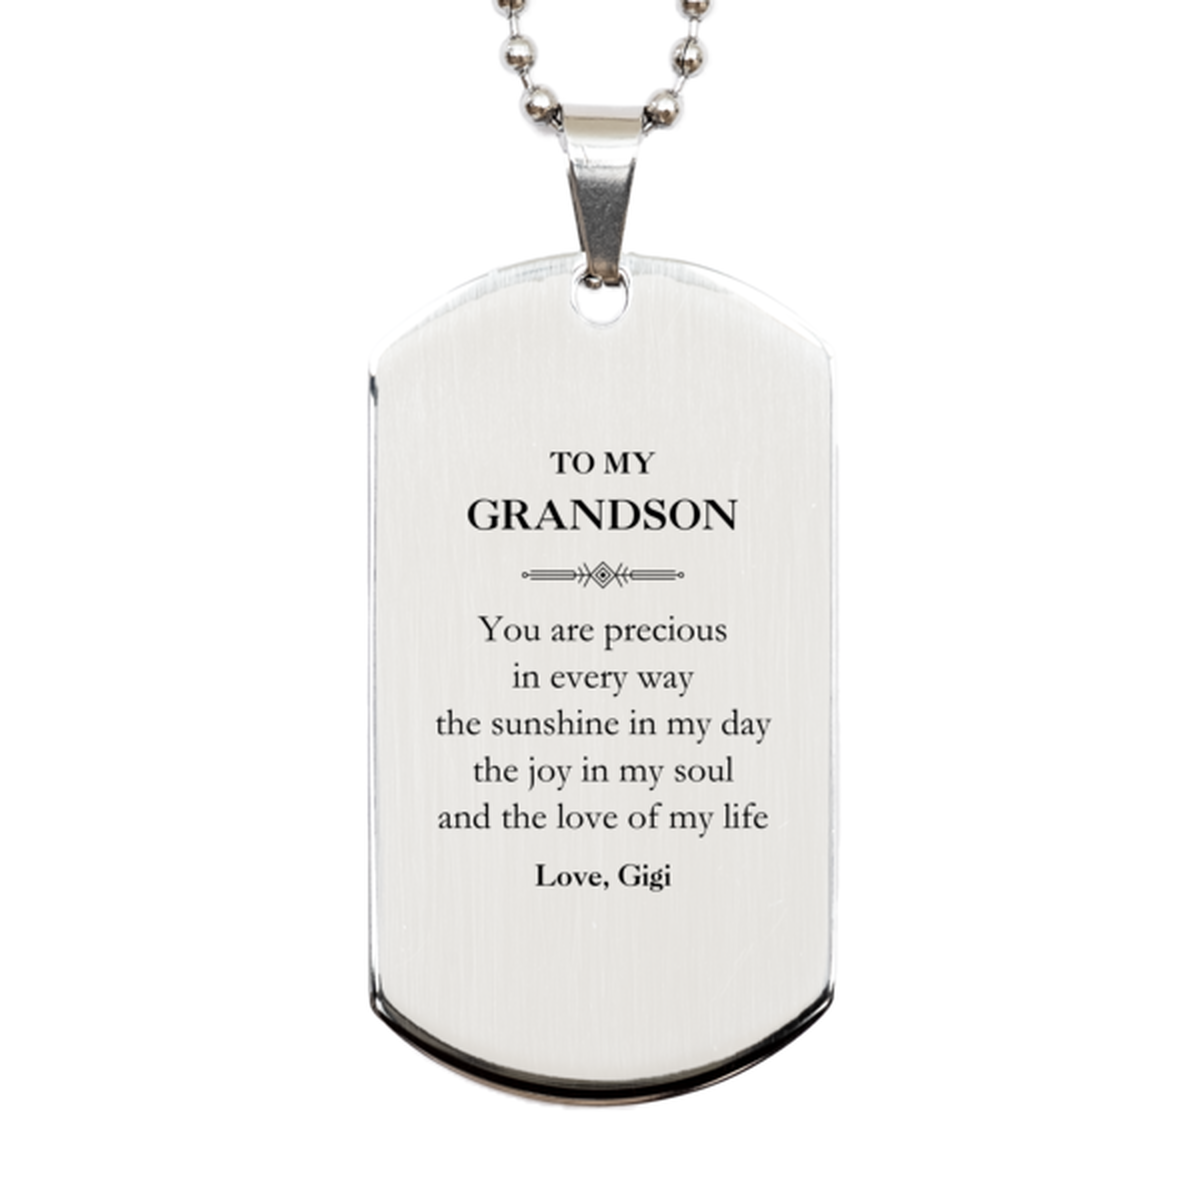 Graduation Gifts for Grandson Silver Dog Tag Present from Gigi, Christmas Grandson Birthday Gifts Grandson You are precious in every way the sunshine in my day. Love, Gigi